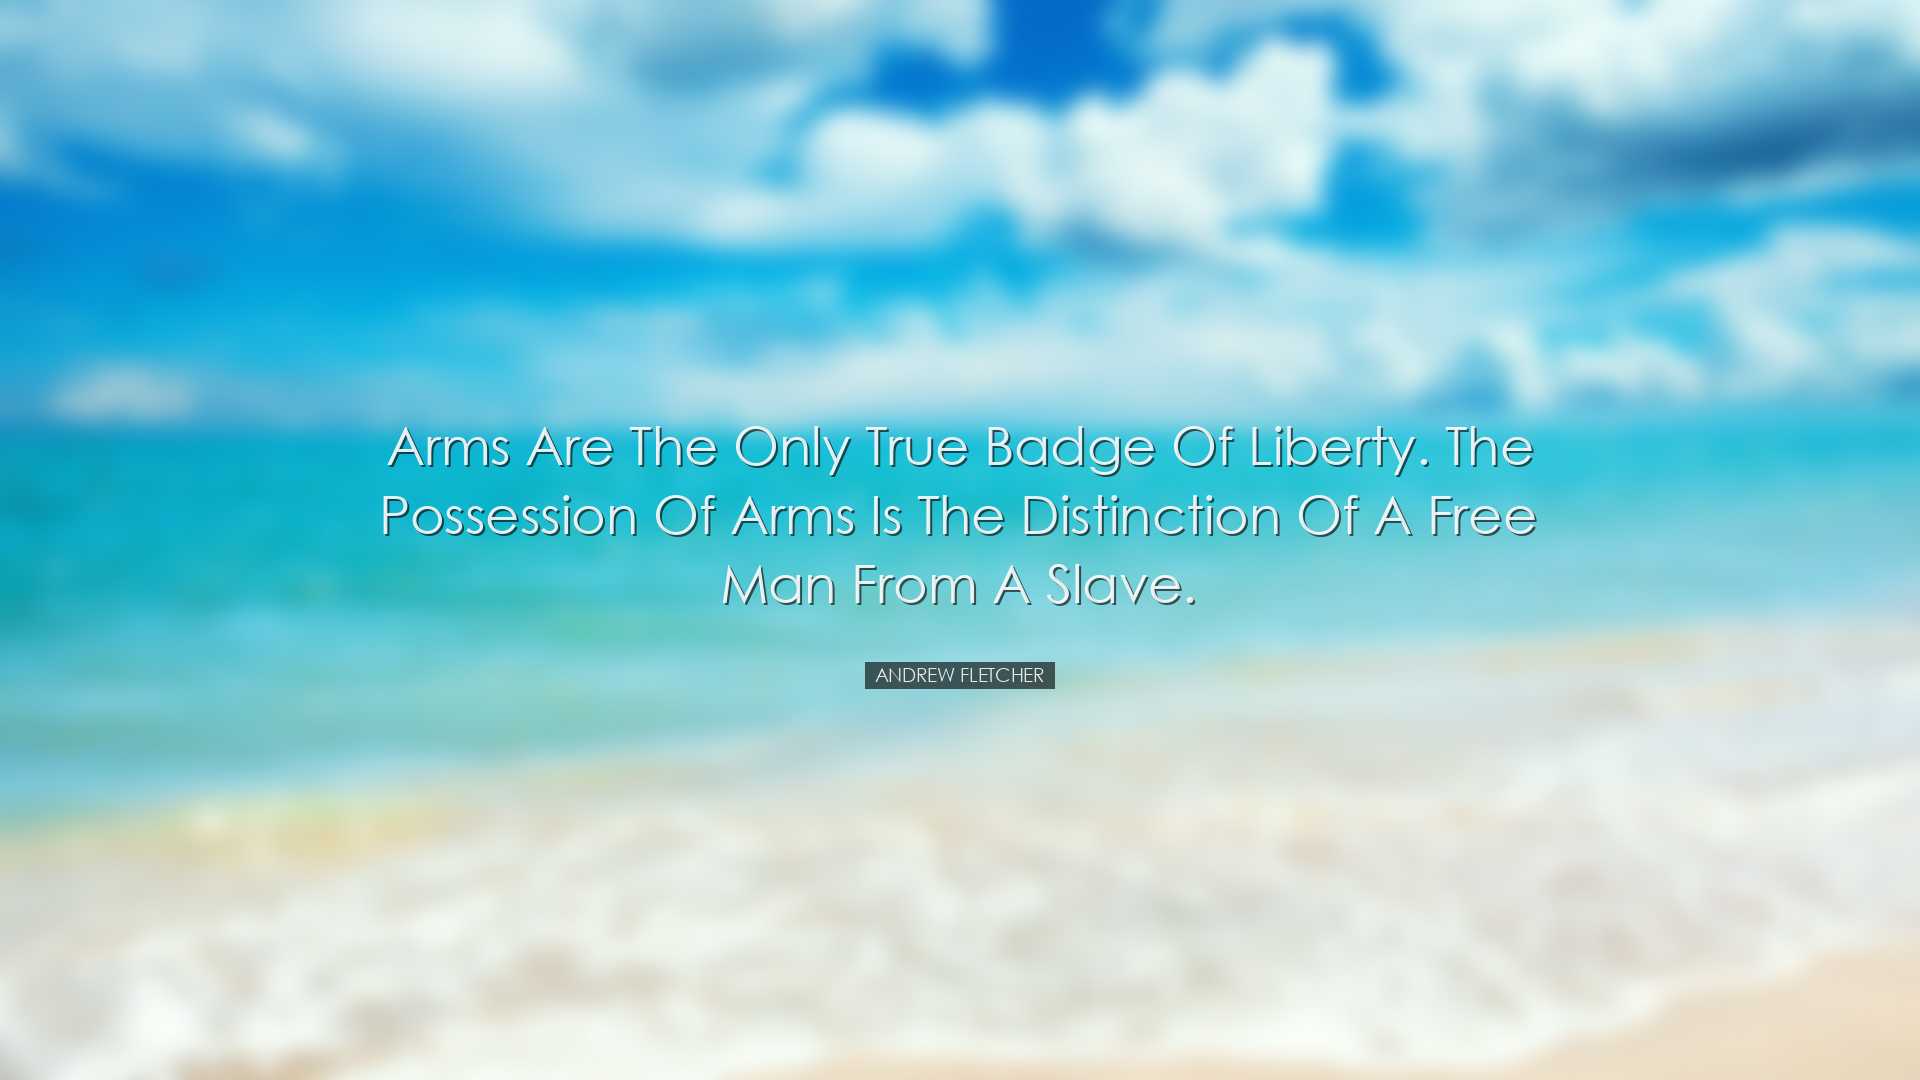 Arms are the only true badge of liberty. The possession of arms is